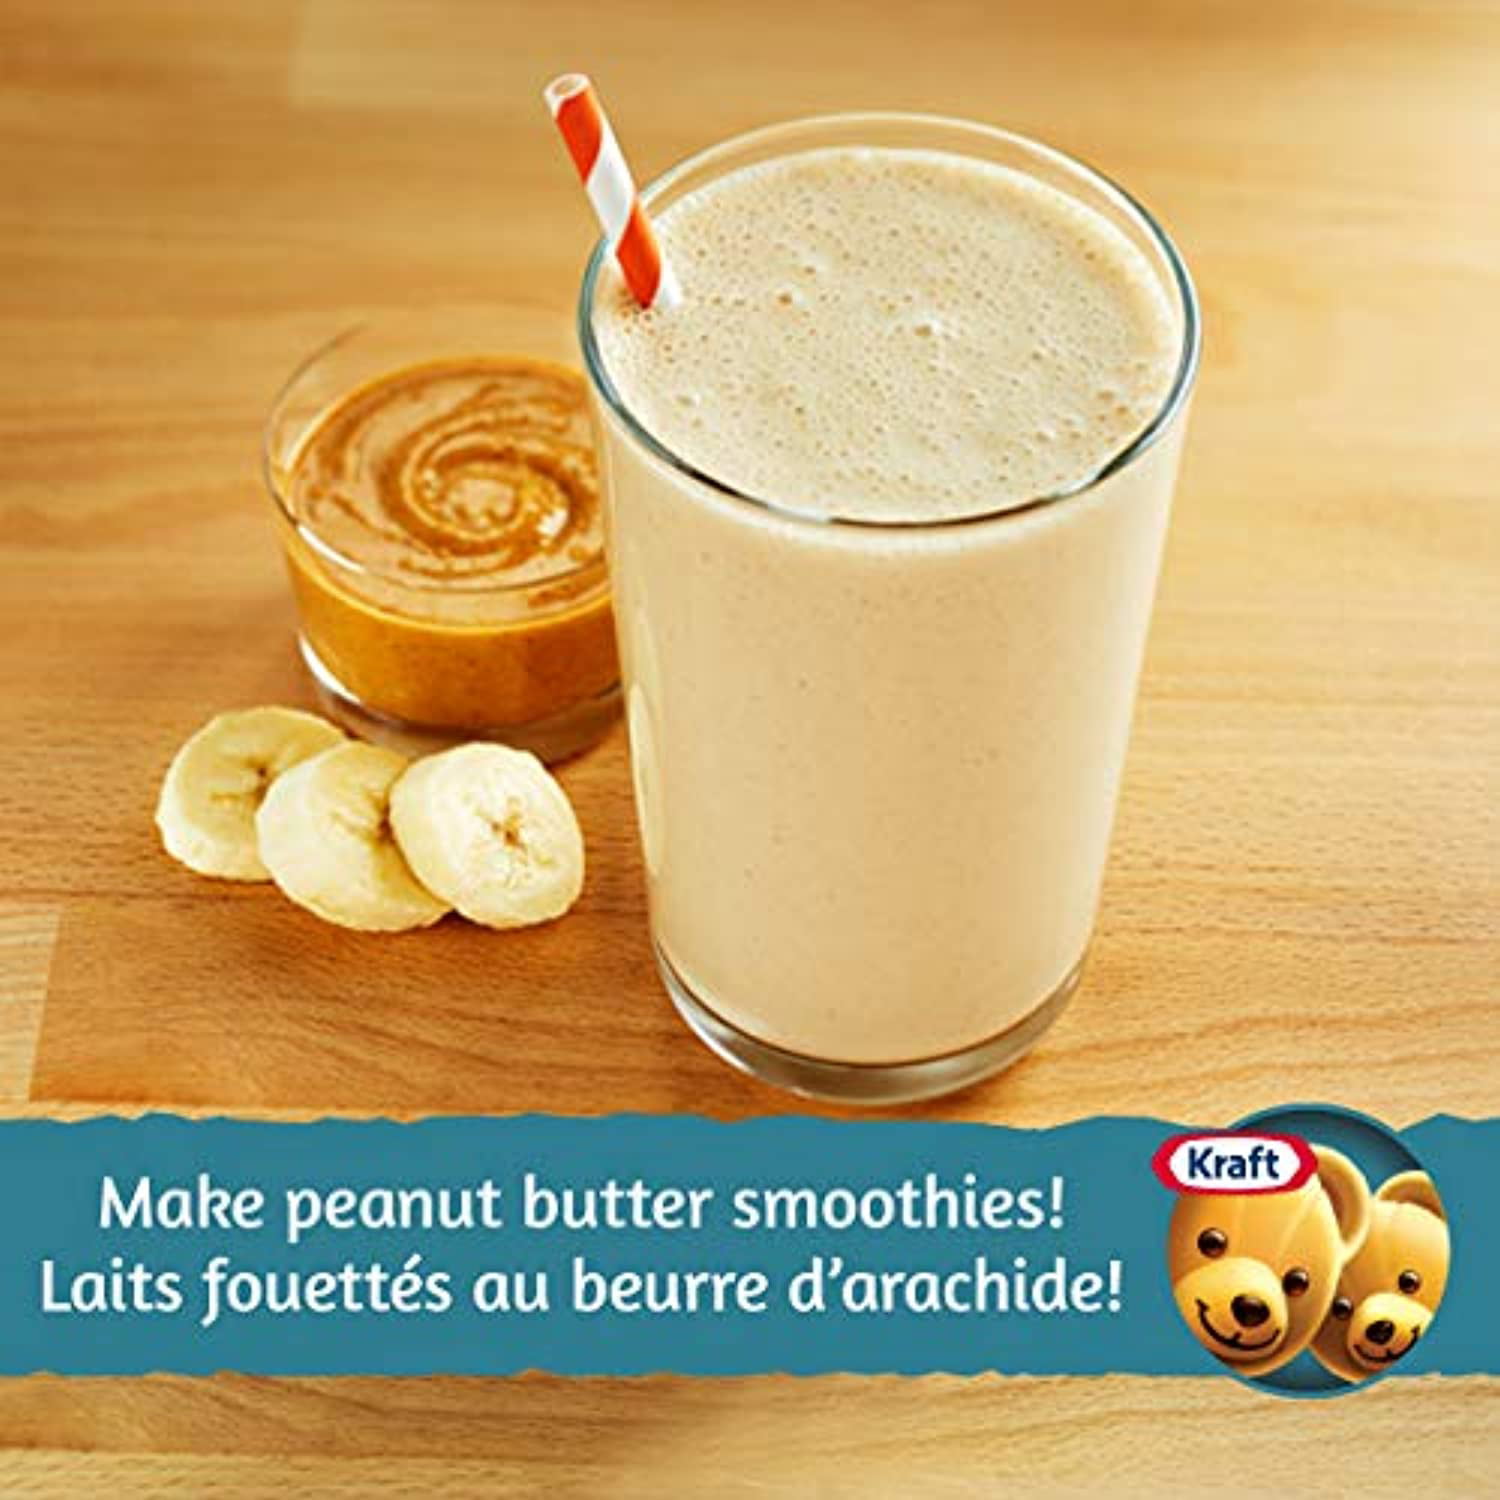 Kraft Peanut Butter, A good example of the whimsical family…